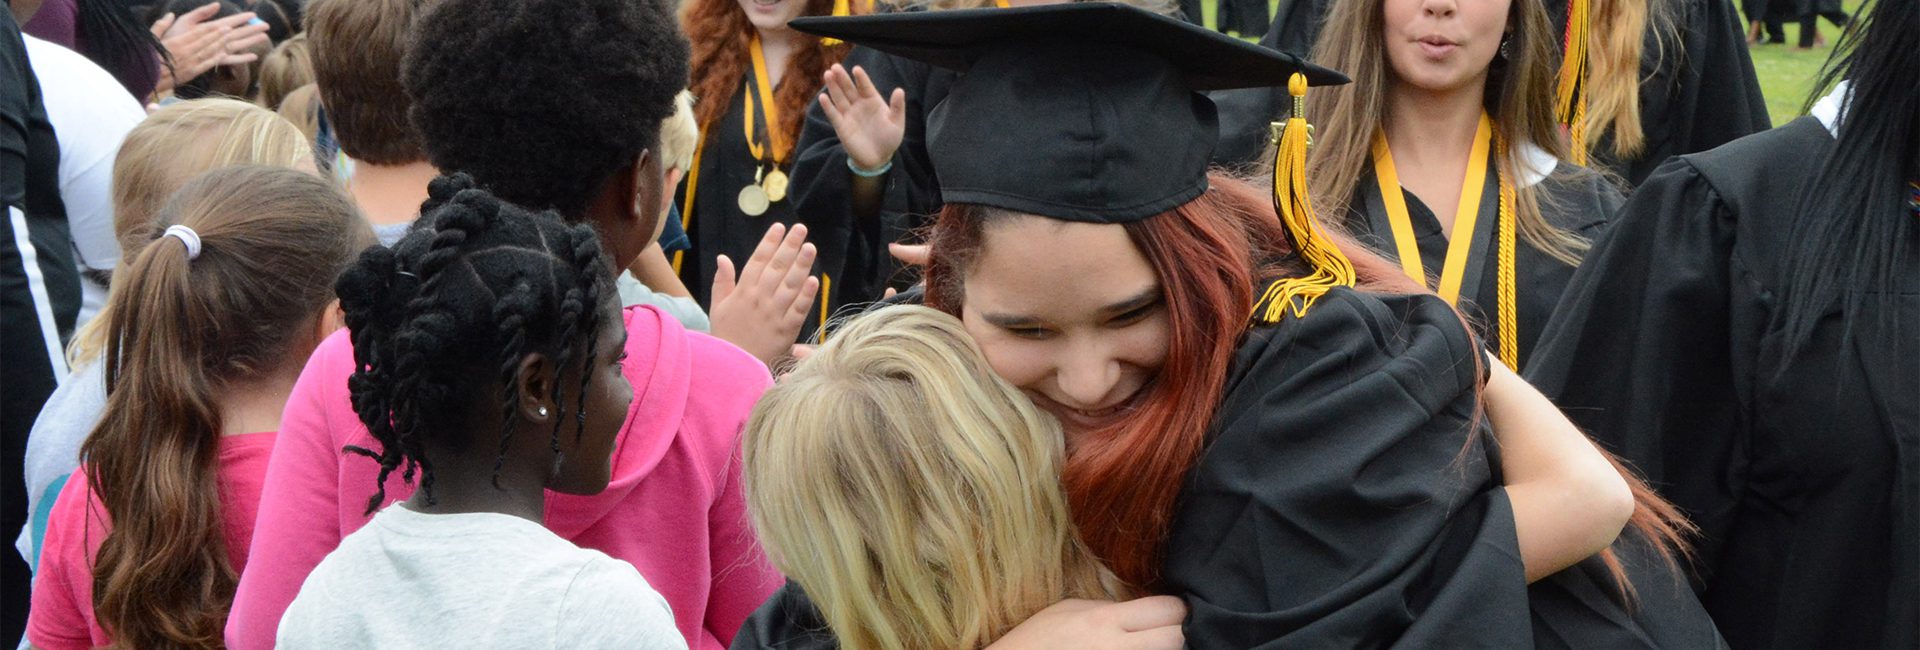 A woman in graduation cap and gown hugging another person.